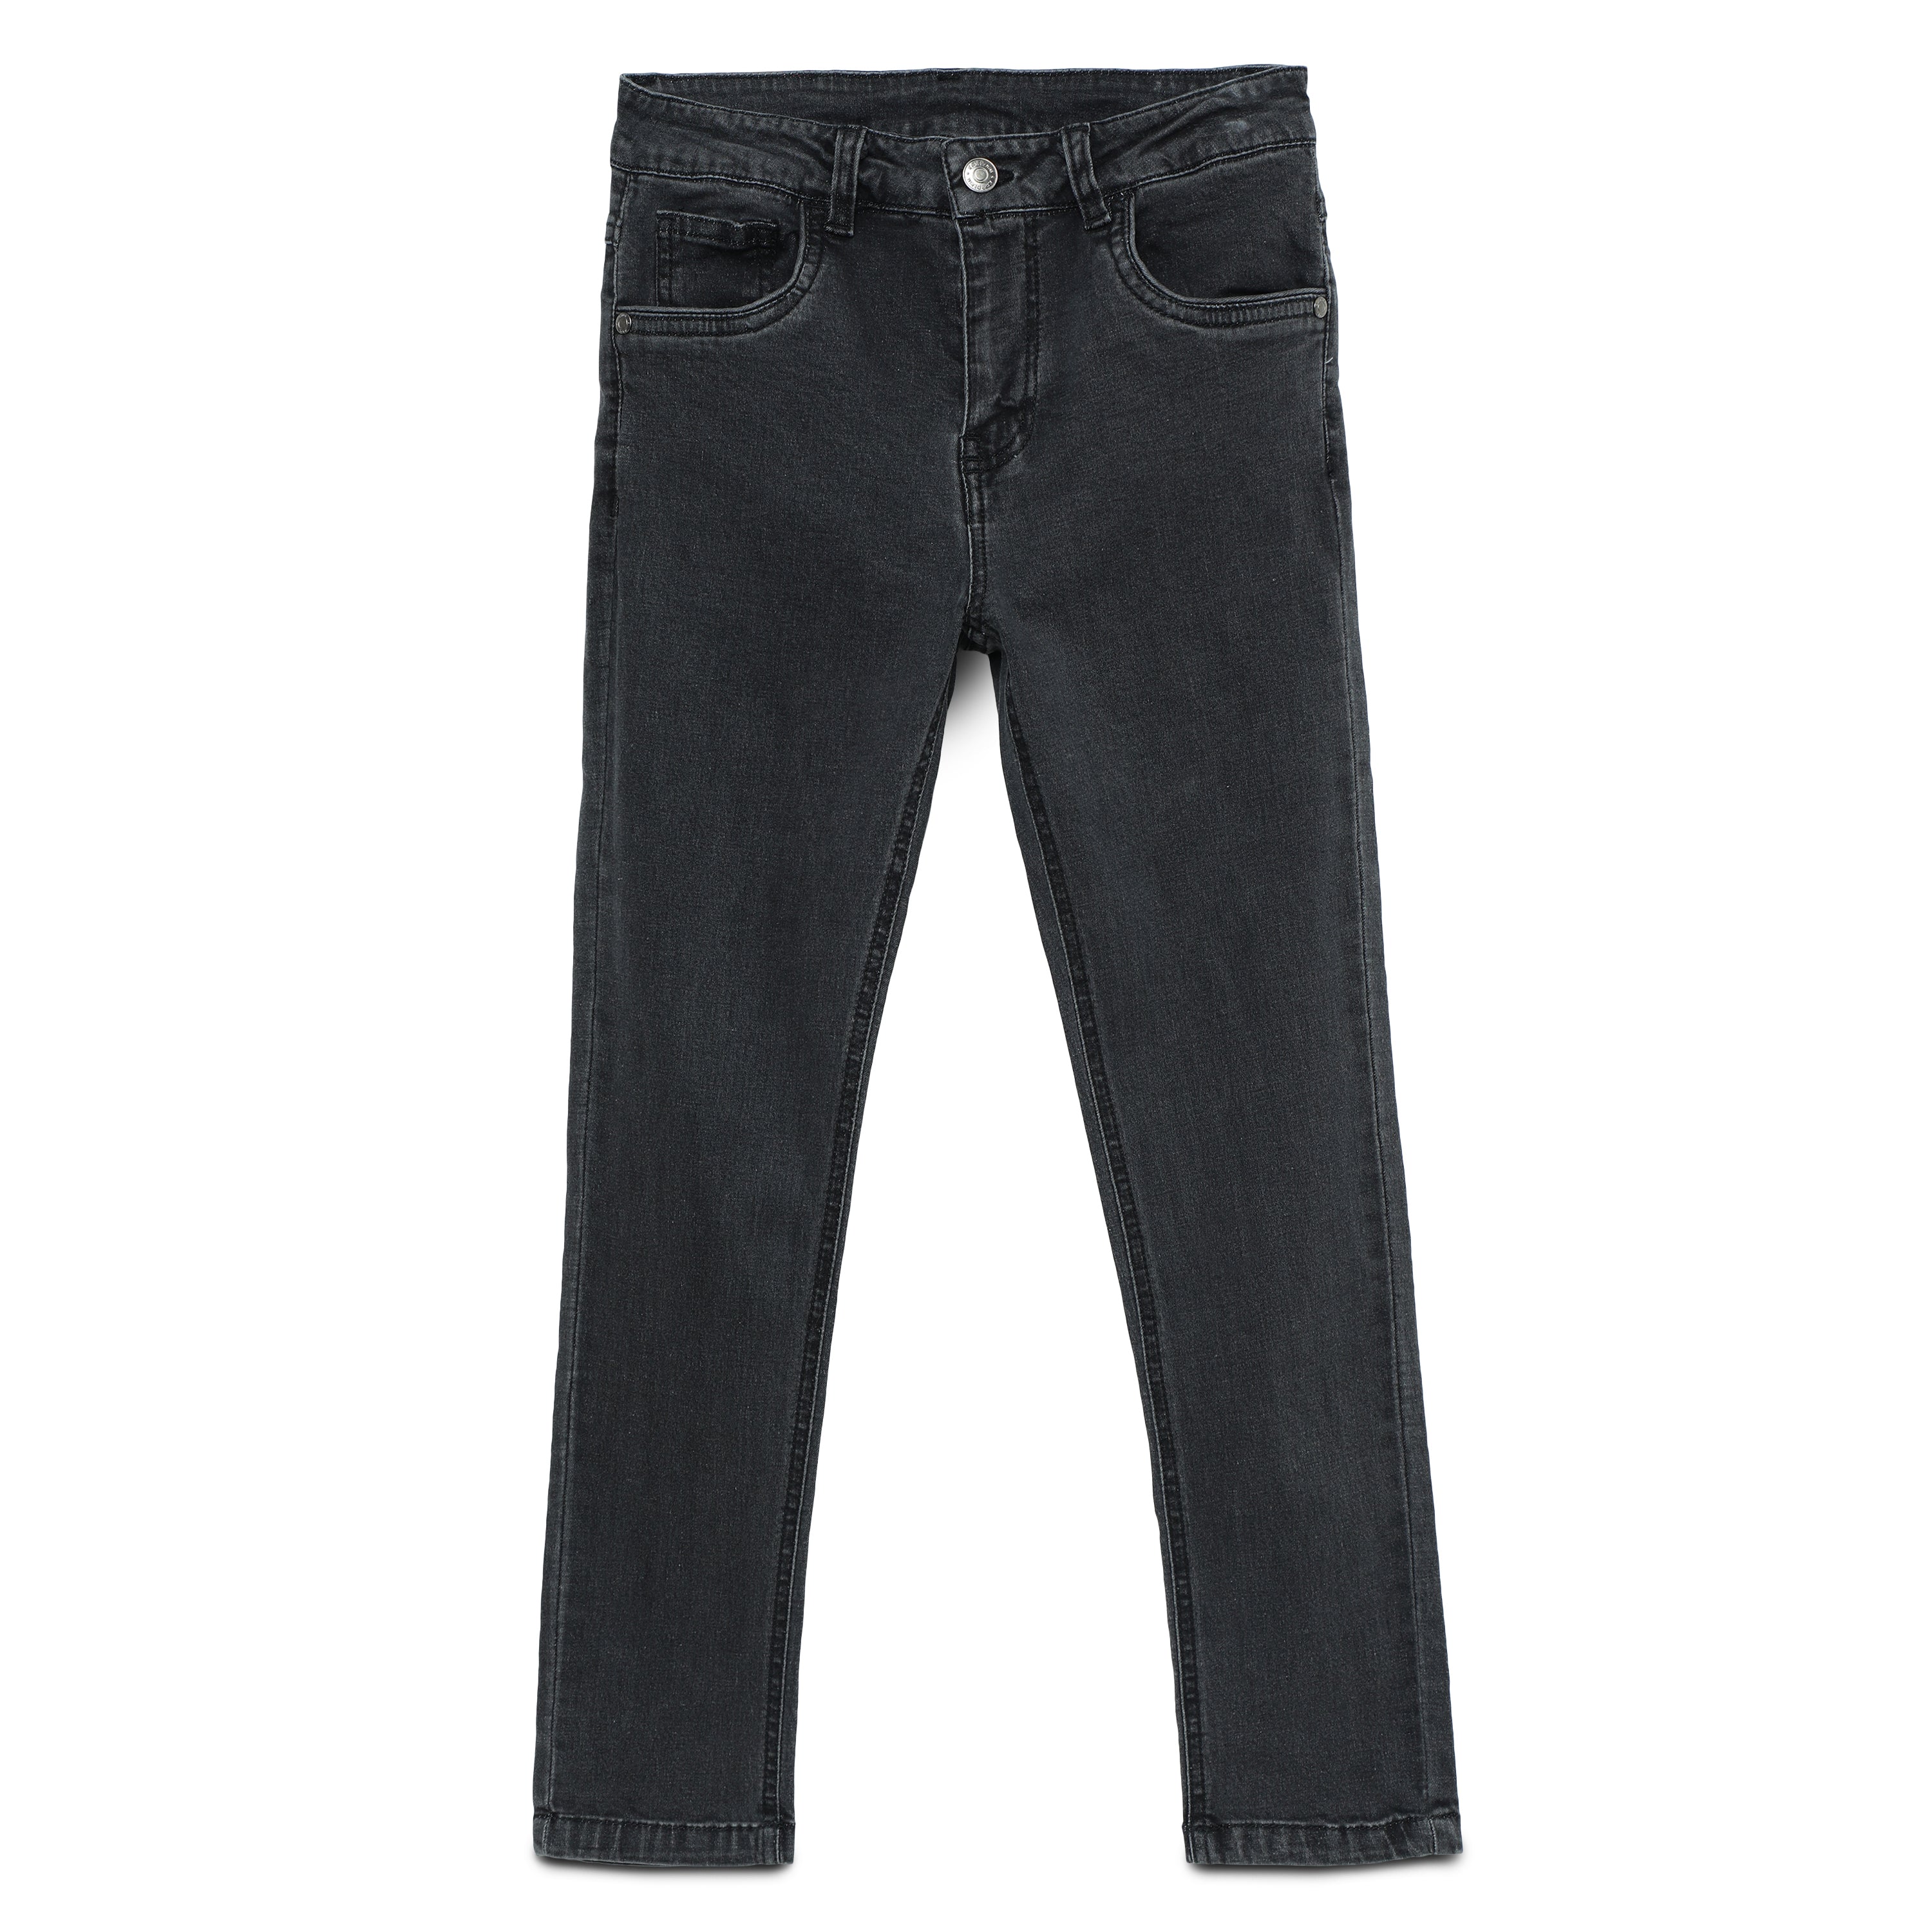 Discover more than 200 boys black jeans latest